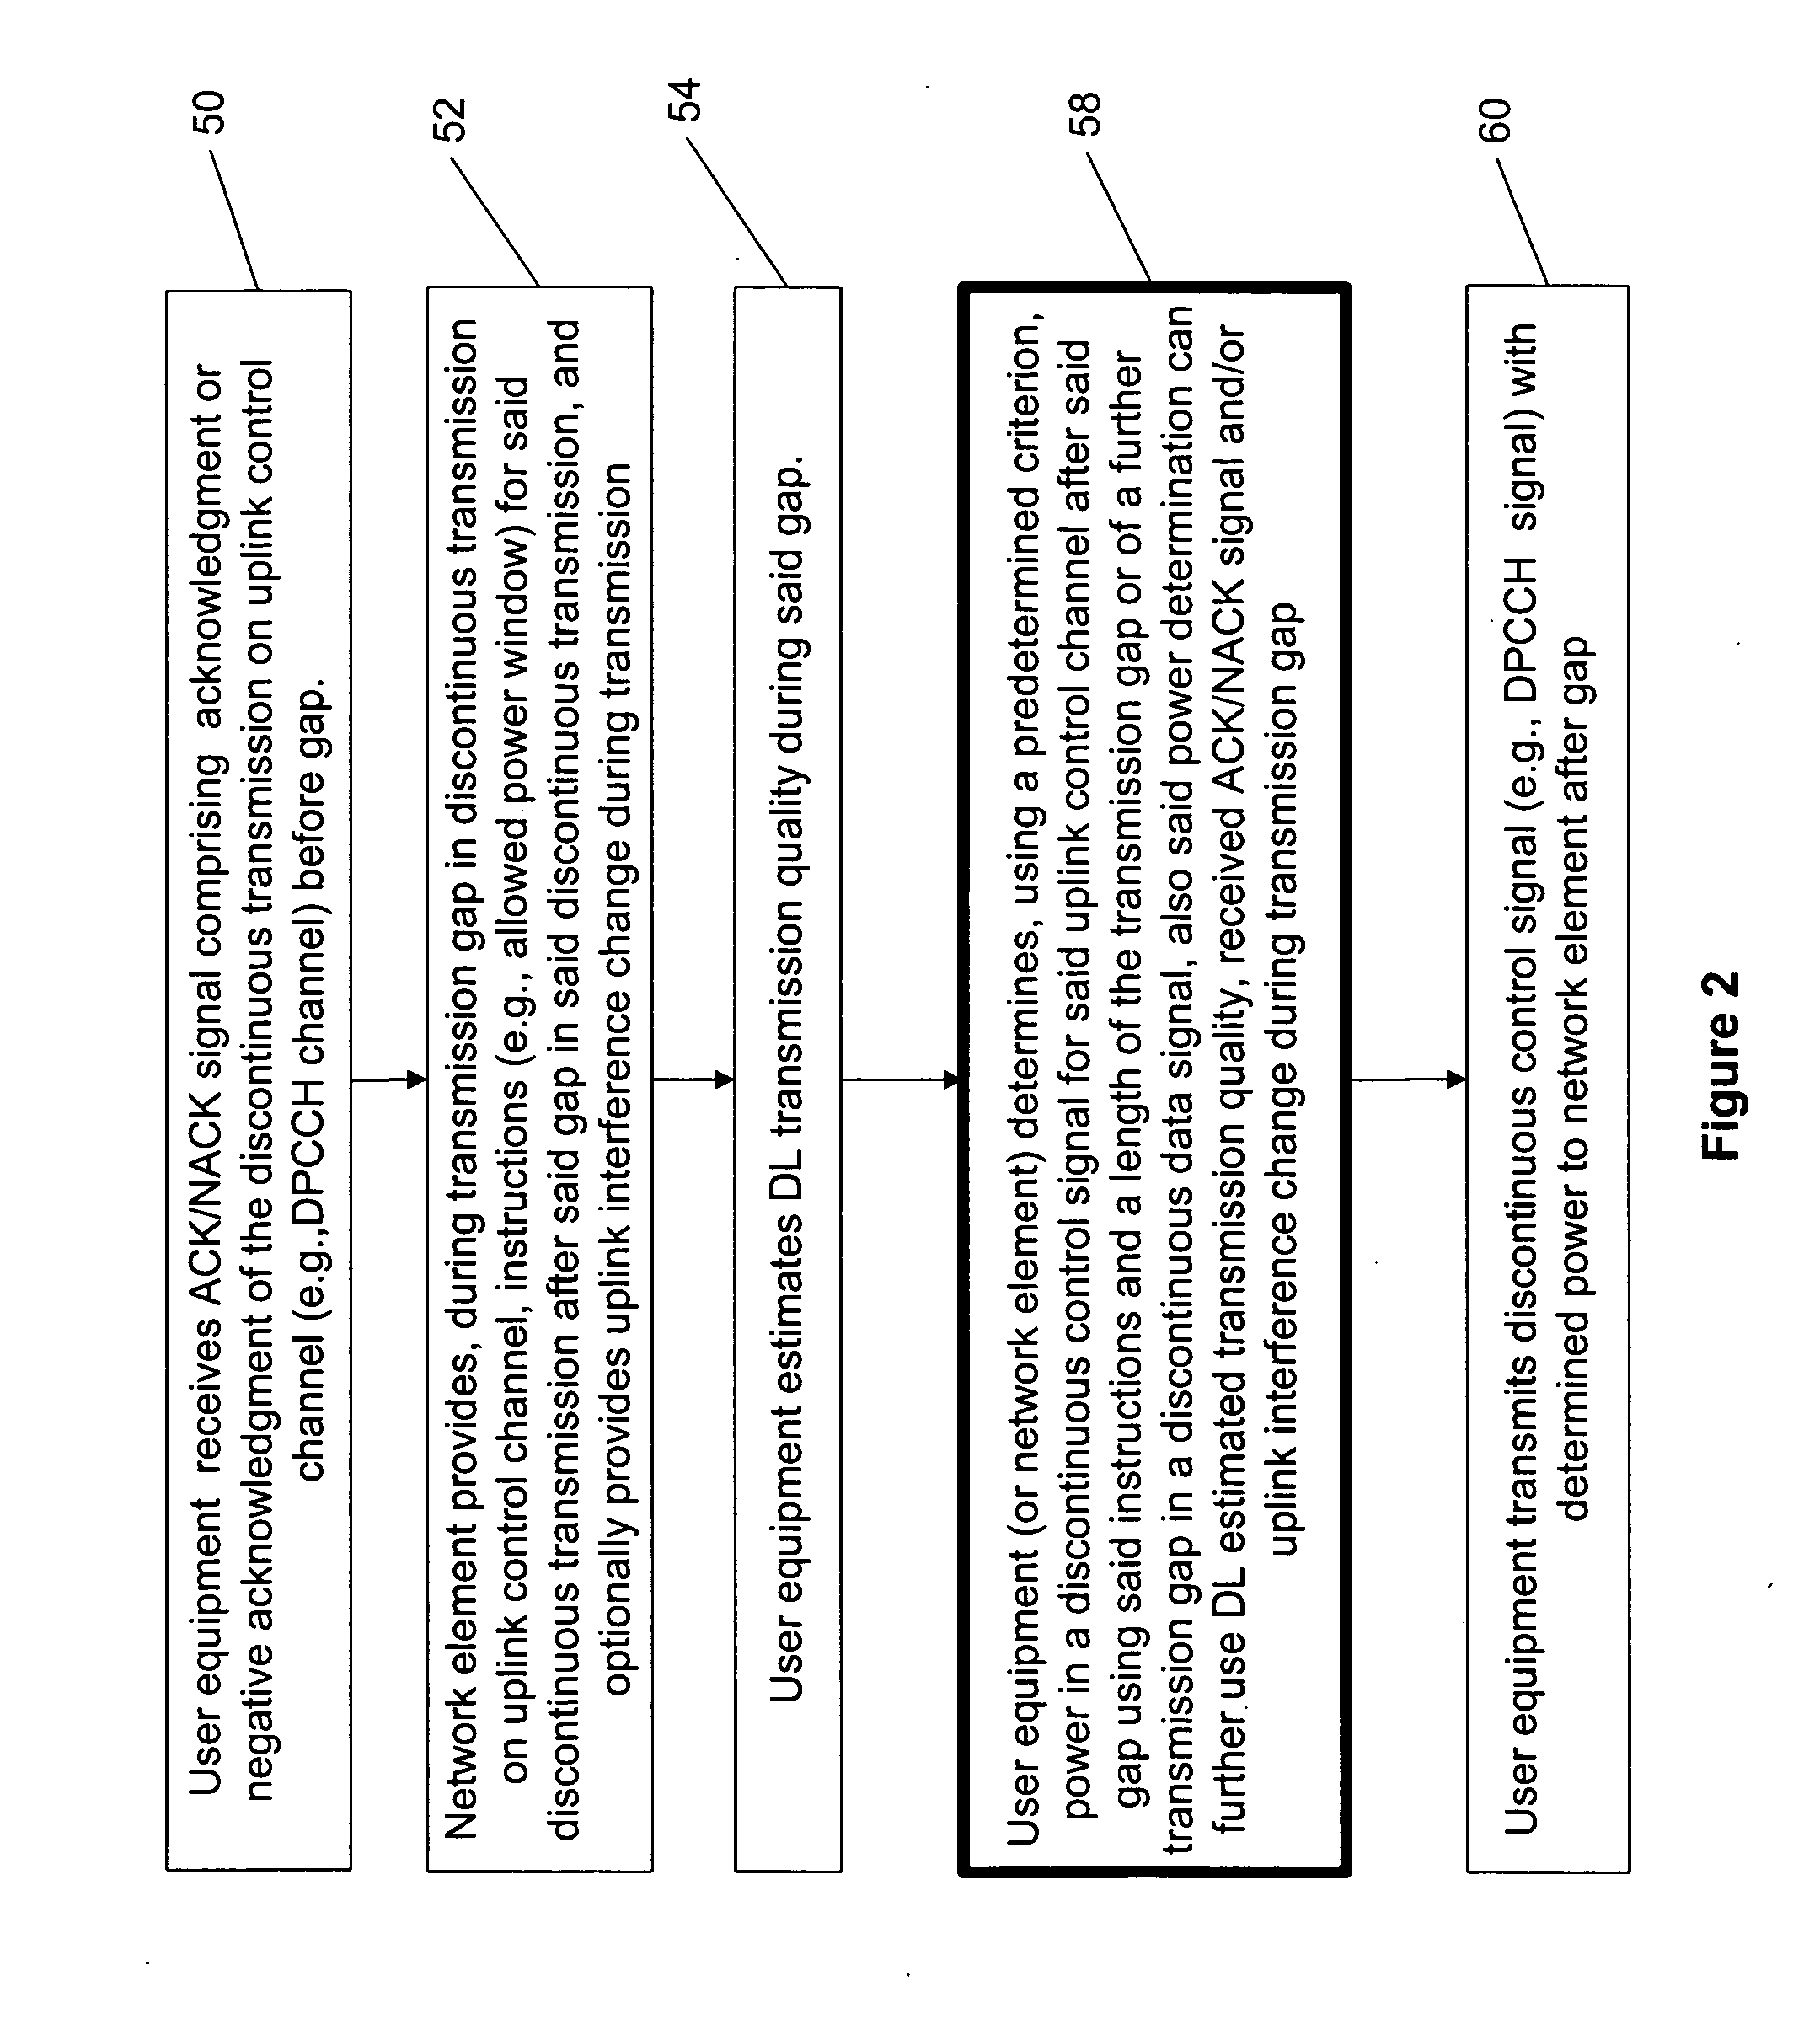 Power control for gated uplink control channel